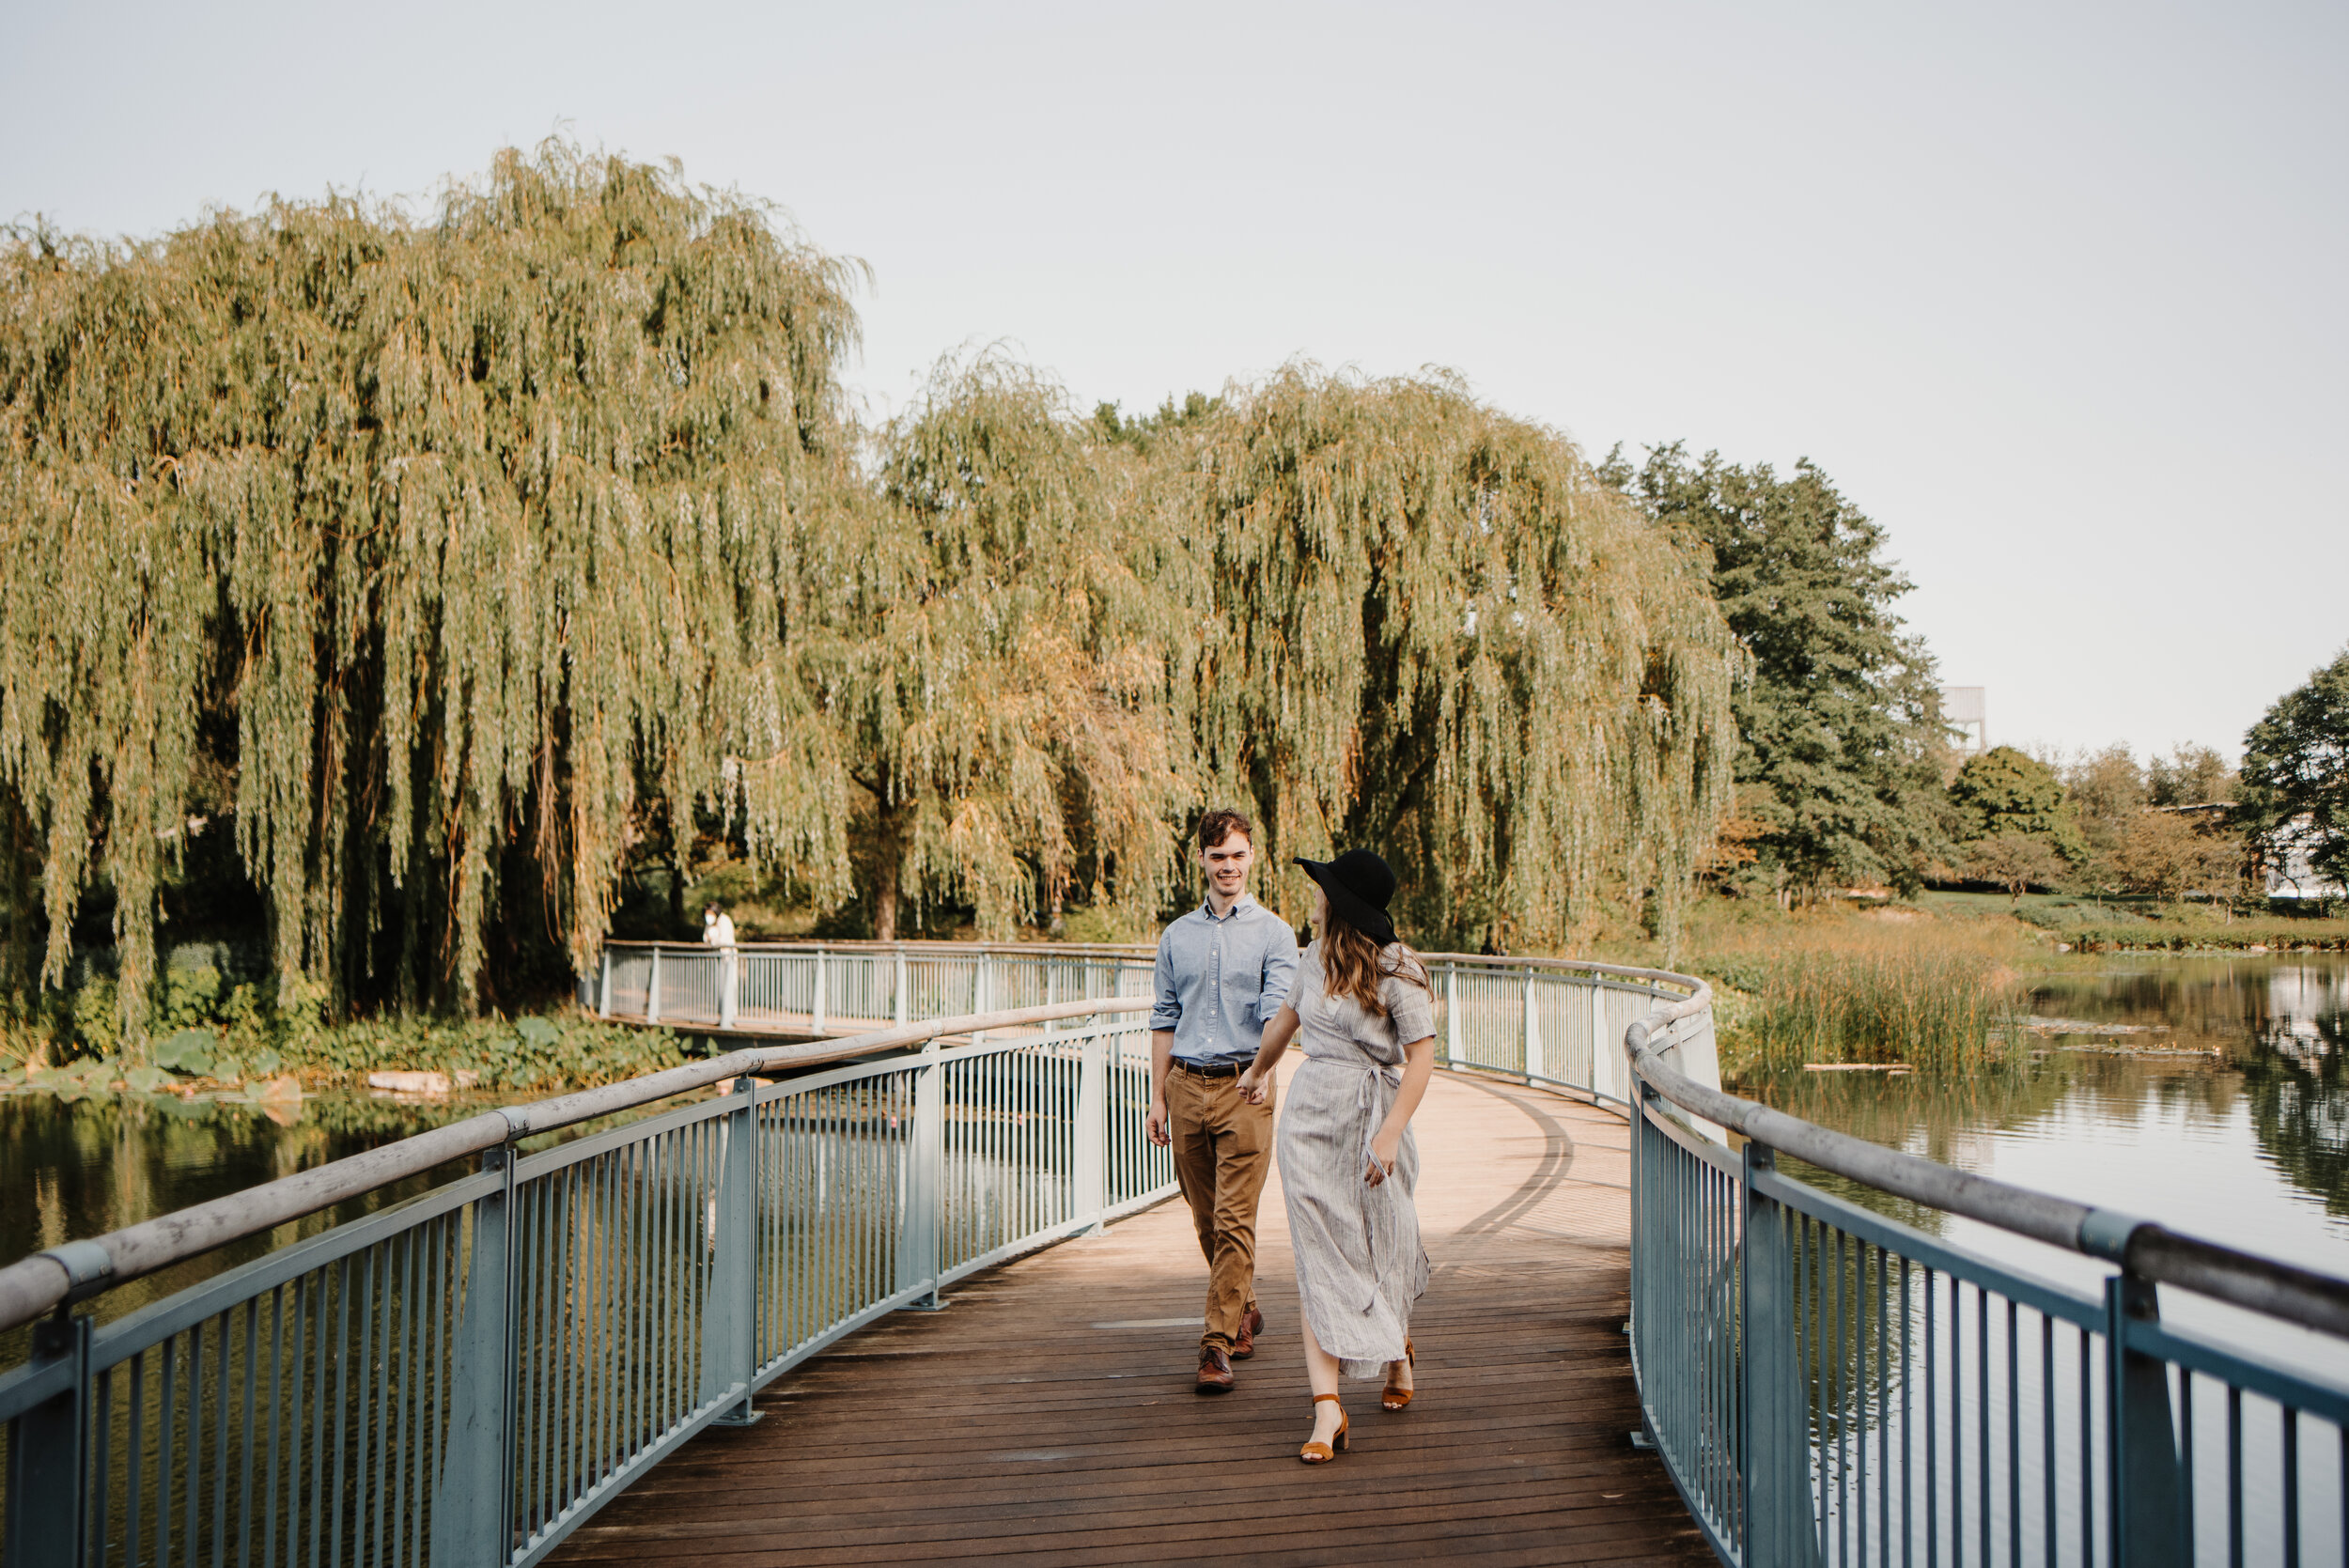 Sunny Botanic Garden Engagement Session captured by Dana Bell Photography | CHI thee WED